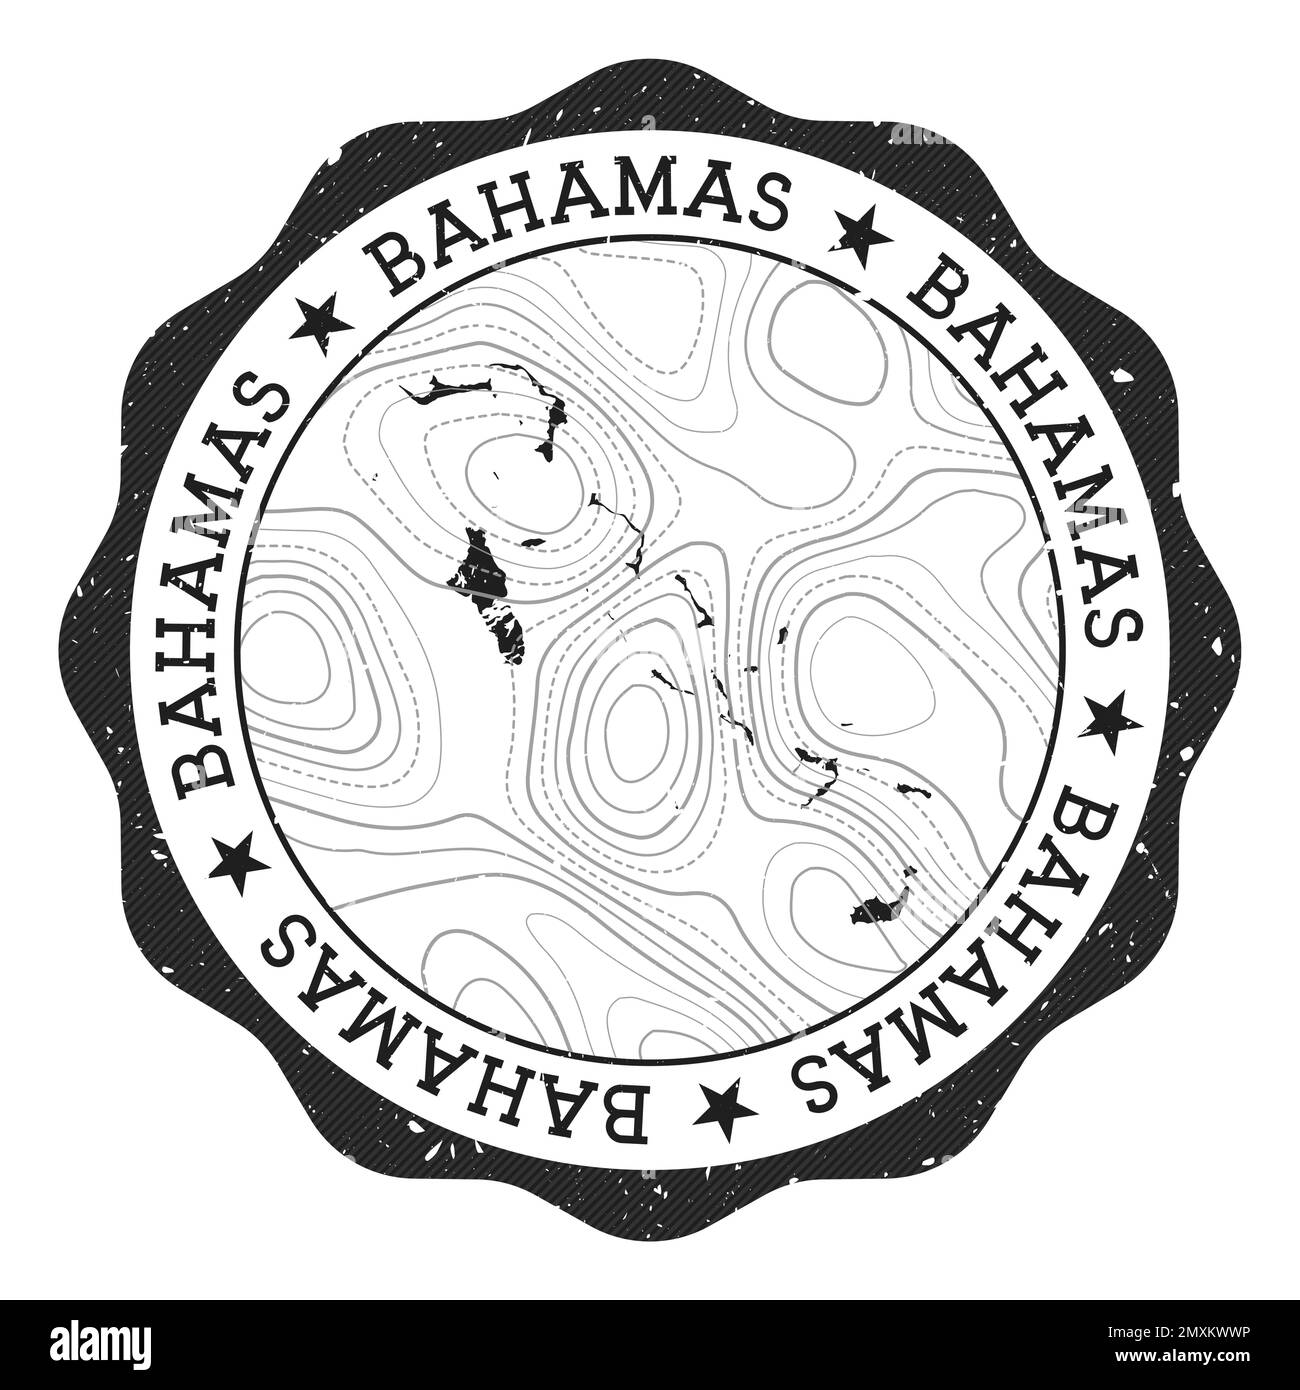 Bahamas outdoor stamp. Round sticker with map of country with topographic isolines. Vector illustration. Can be used as insignia, logotype, label, sti Stock Vector